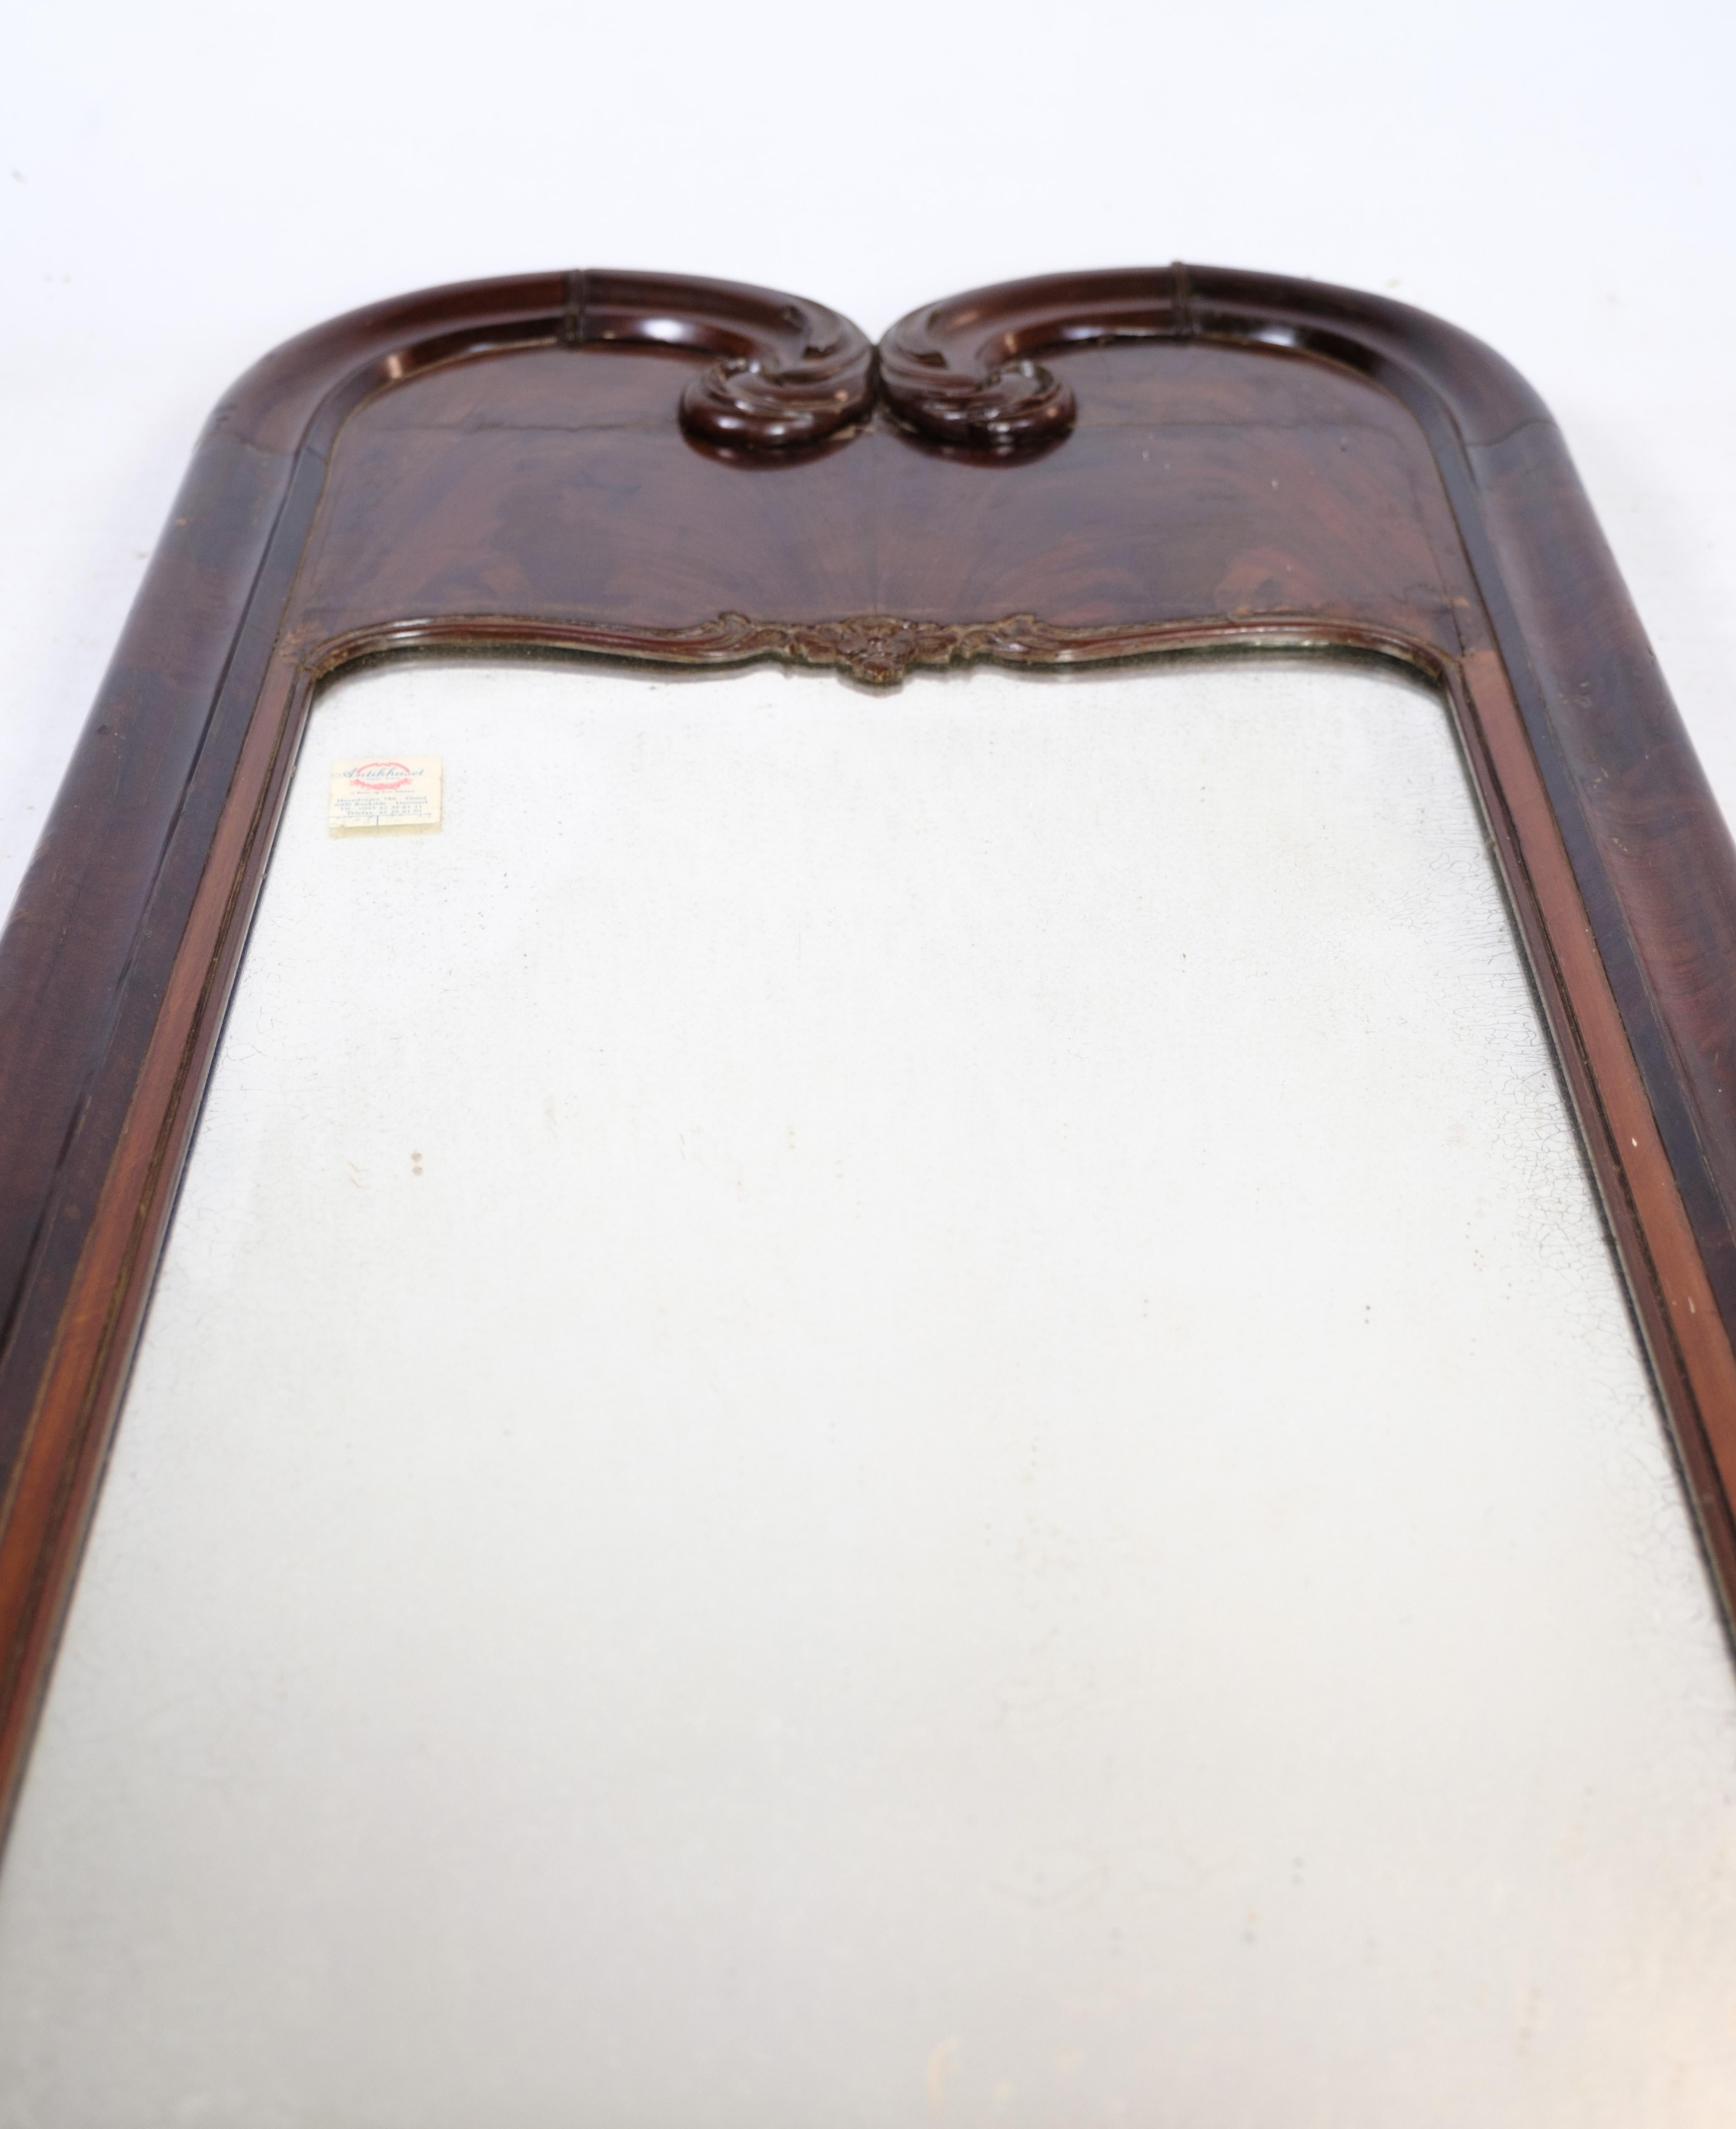 Antique mirror with hand polished mahogany originally from Denmark around the 1880s.
Dimensions in cm: H: 153 W: 59.